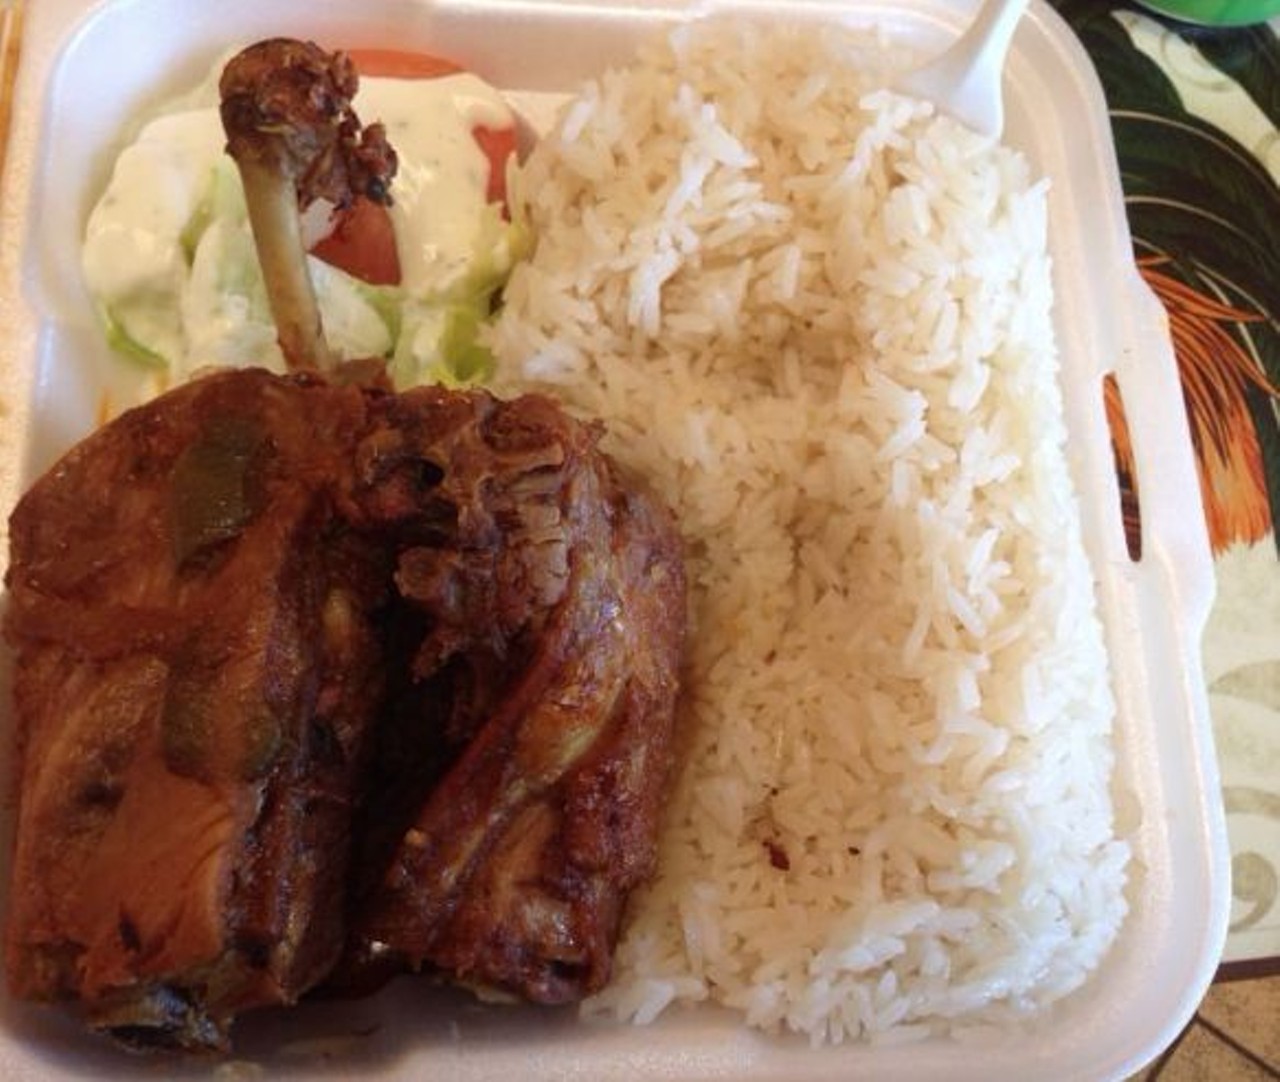 Carribean Services  
5812 Old Winter Garden Road, 407-298-0088
This little place may be a bit difficult to find, but is well worth the search. Their small menu is filled with bangers, like oxtail or griot. 
Photo via Michell D./ Yelp